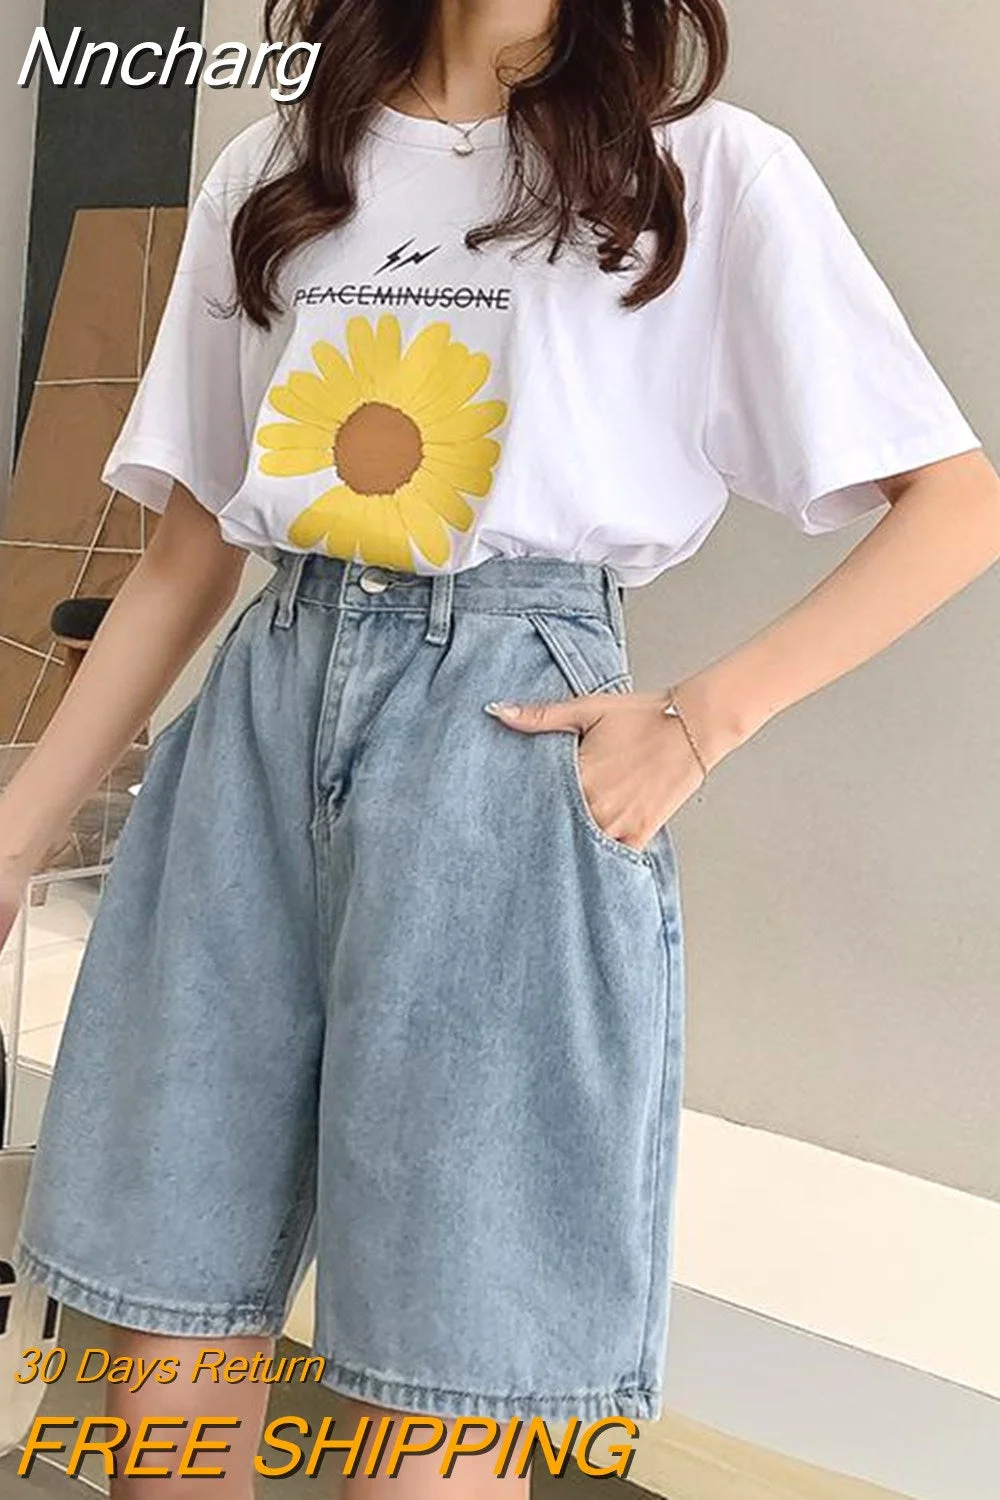 Nncharge New Woman Wide Legs High Waist Blue Knee-lenght Denim Shorts Casual Female Loose Fit Jeans Vintage Ladies Bermuda Shorts